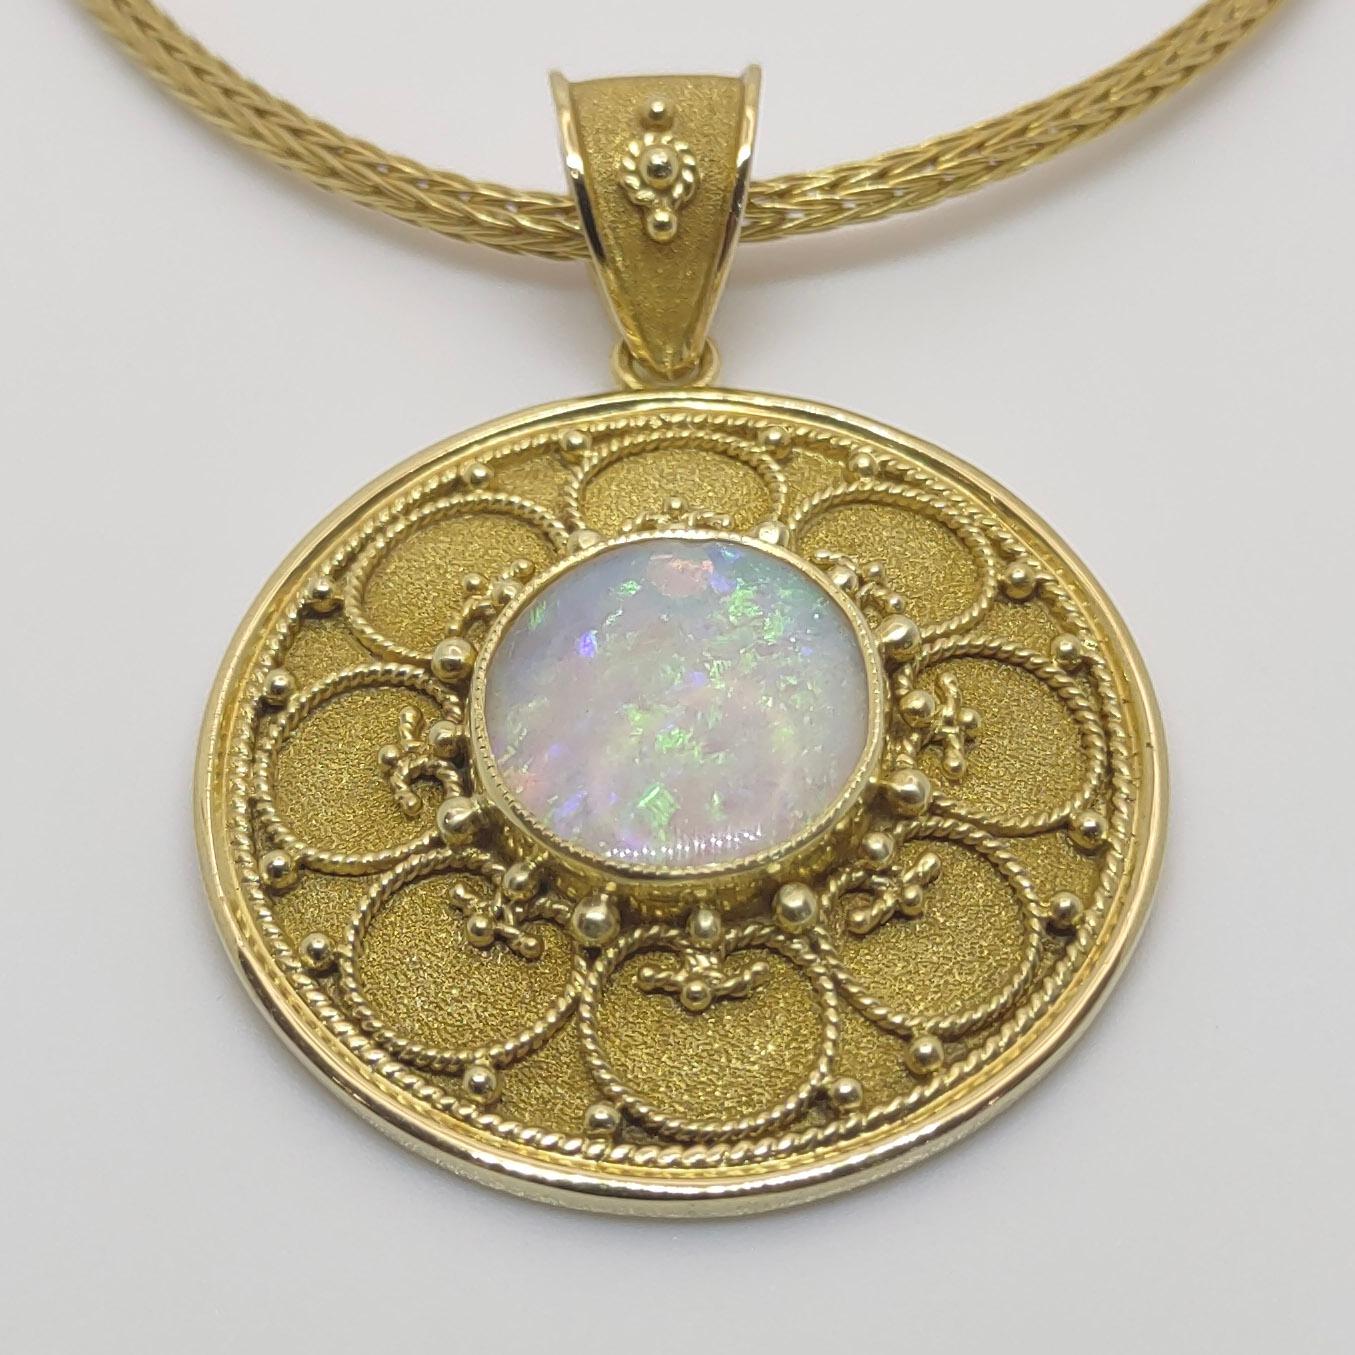 This S.Georgios designer pendant enhancer is handmade in 18 Karat yellow gold. It is microscopically decorated with granulation work beads and wires and has a gorgeous unique velvet background. This unique gorgeous round pendant enhancer features an